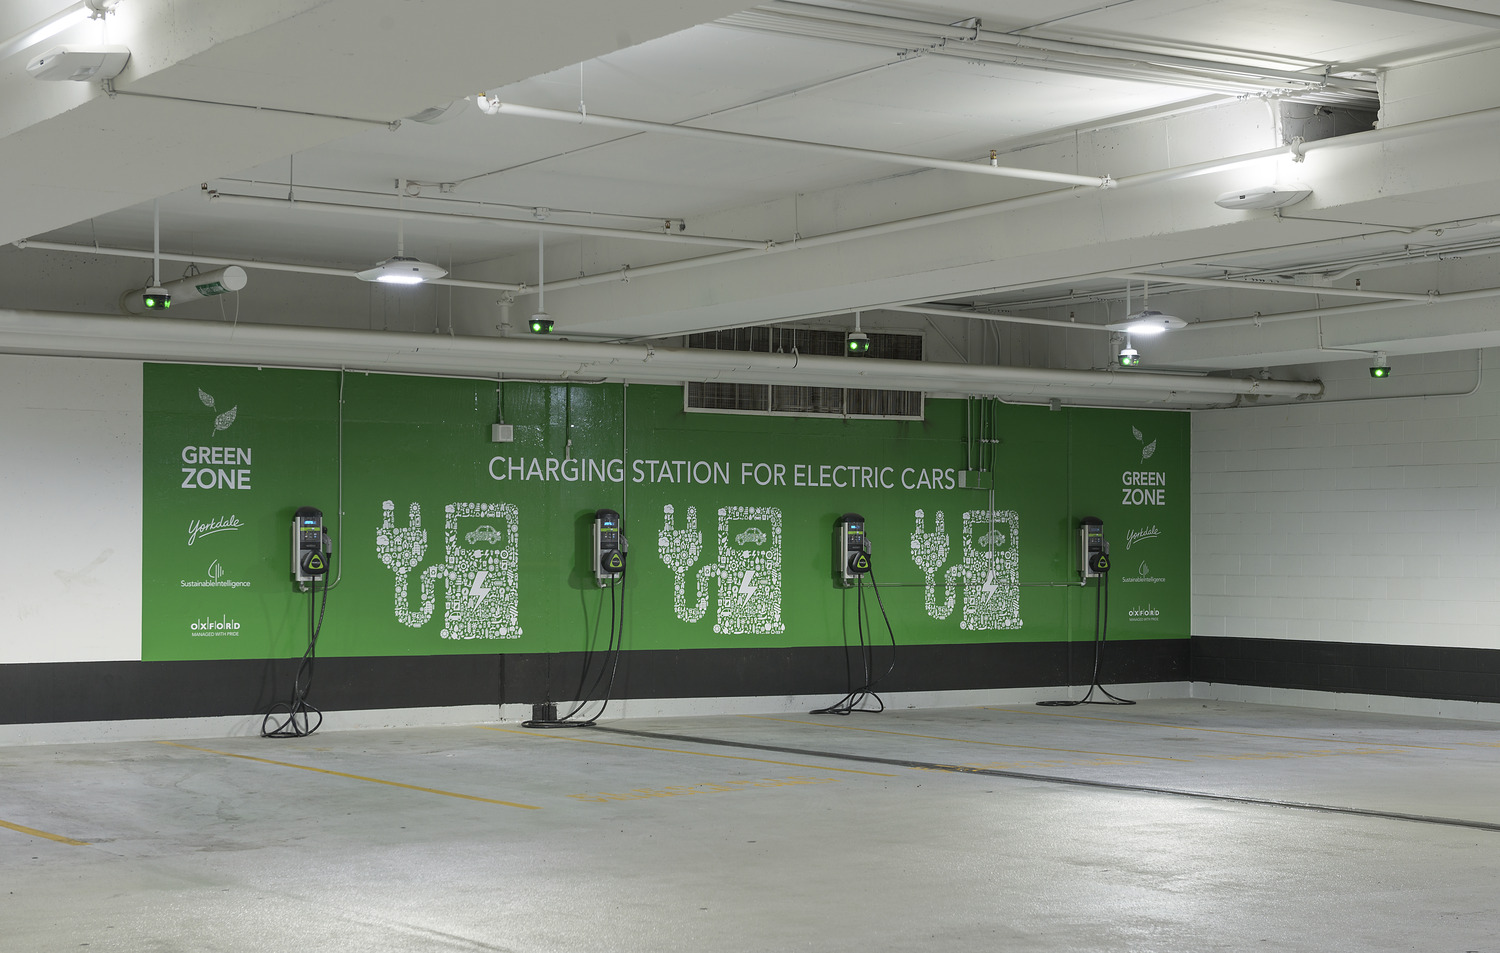 An electric car charging station in a parking garage.